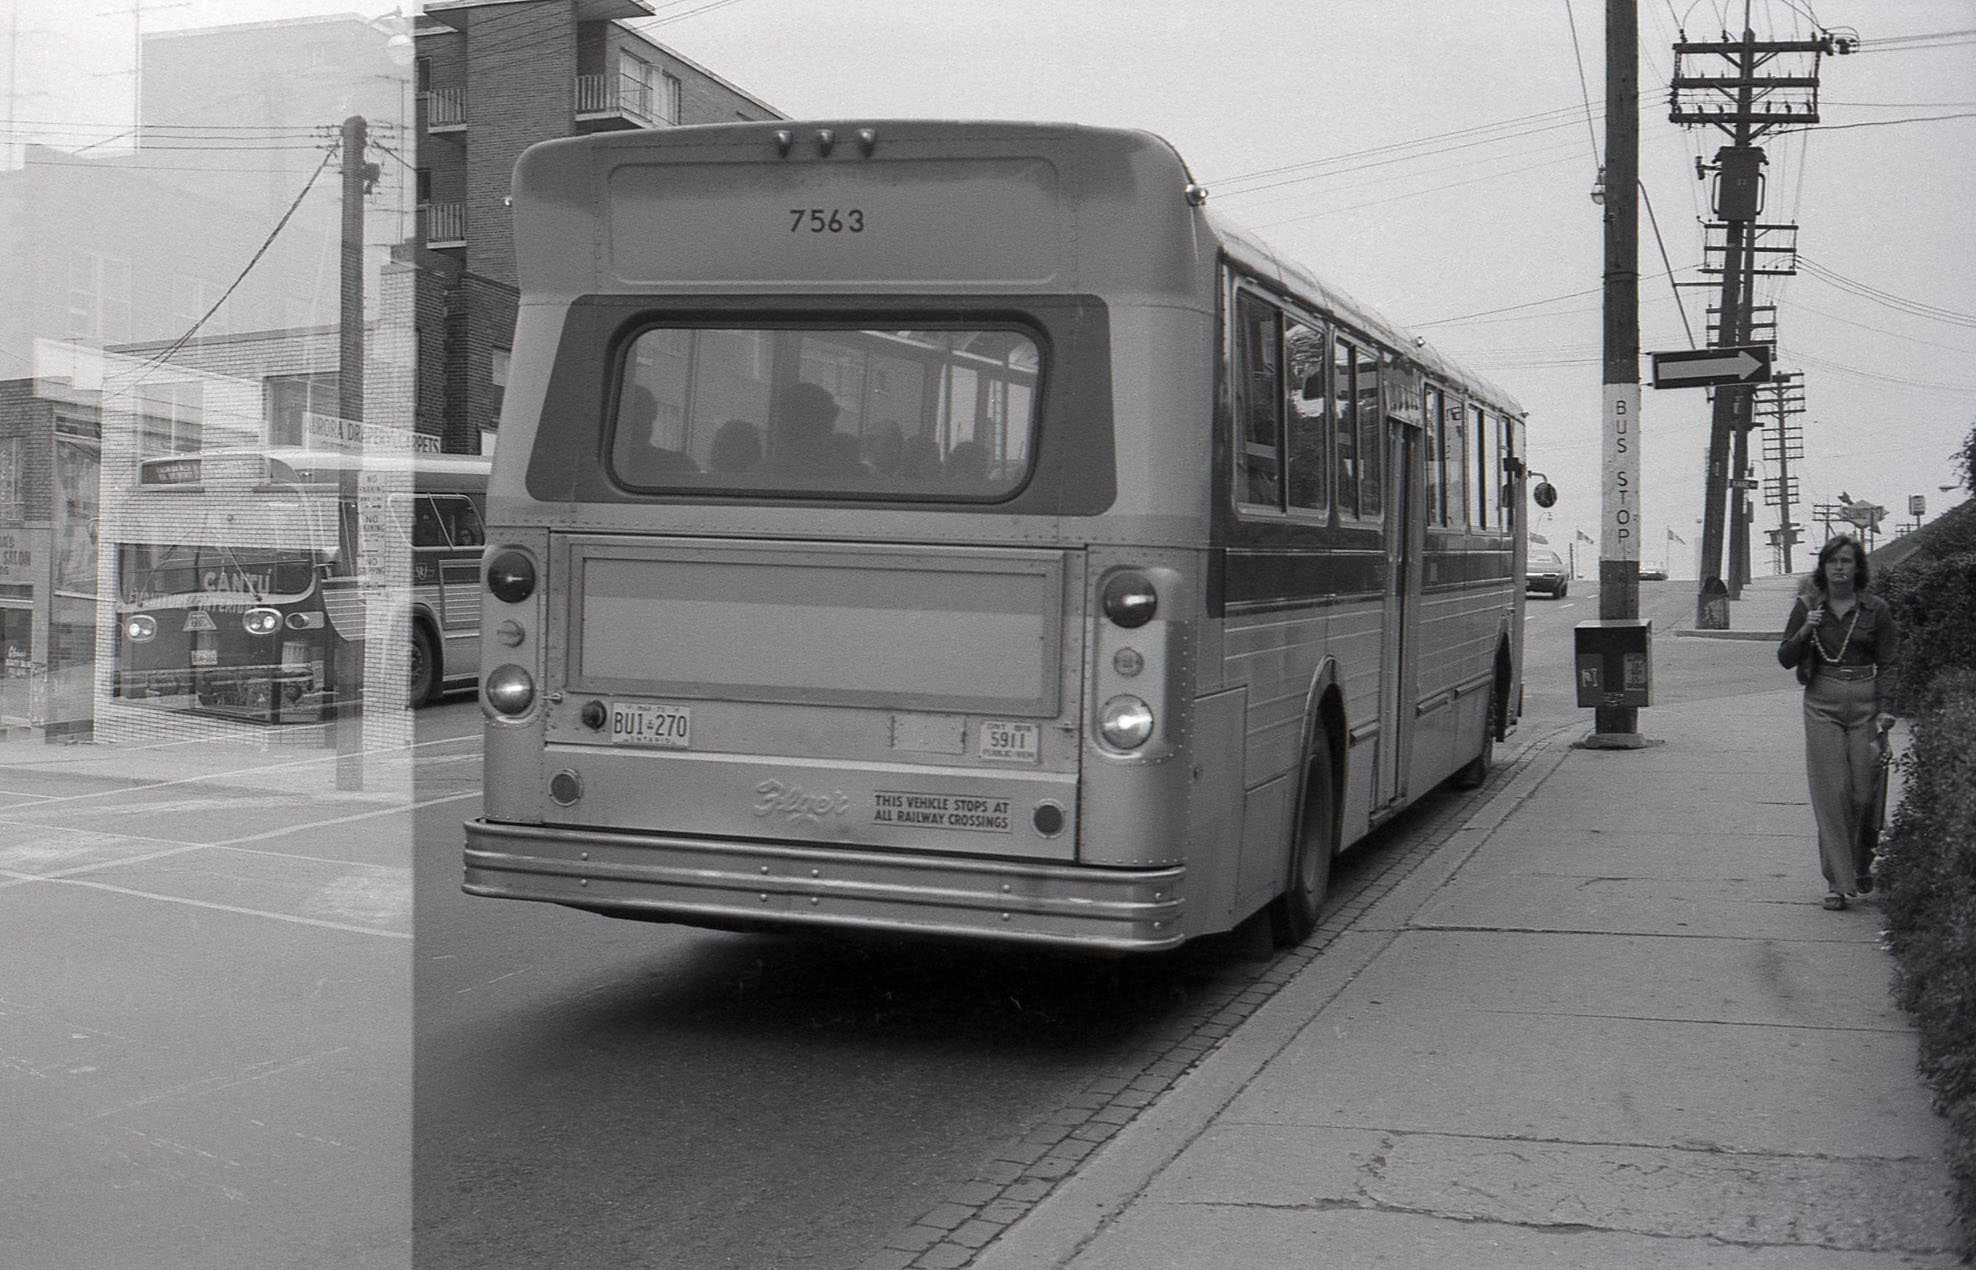 TTC Bus 7563 heading east on Eglinton West, at Kane Avenue TTC bus 7721 can be seen in the background in the second image, heading west on Eglinton Av W., 1974